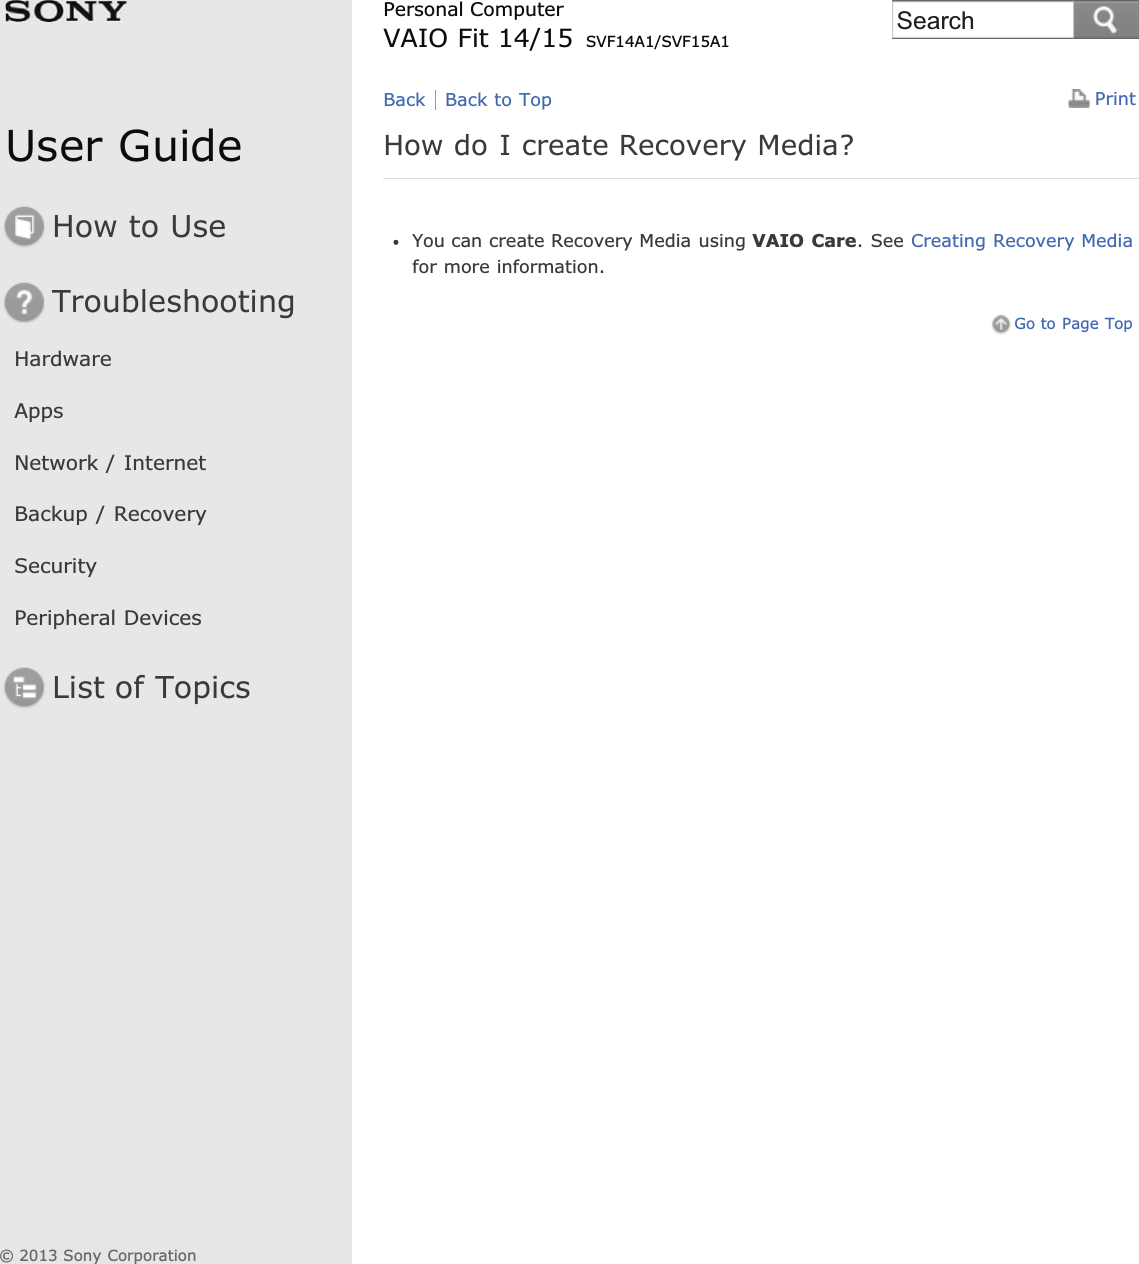 User GuideHow to UseTroubleshootingHardwareAppsNetwork / InternetBackup / RecoverySecurityPeripheral DevicesList of TopicsPrintPersonal ComputerVAIO Fit 14/15 SVF14A1/SVF15A1How do I create Recovery Media?You can create Recovery Media using VAIO Care. See Creating Recovery Mediafor more information.Go to Page TopBack Back to Top© 2013 Sony CorporationSearch